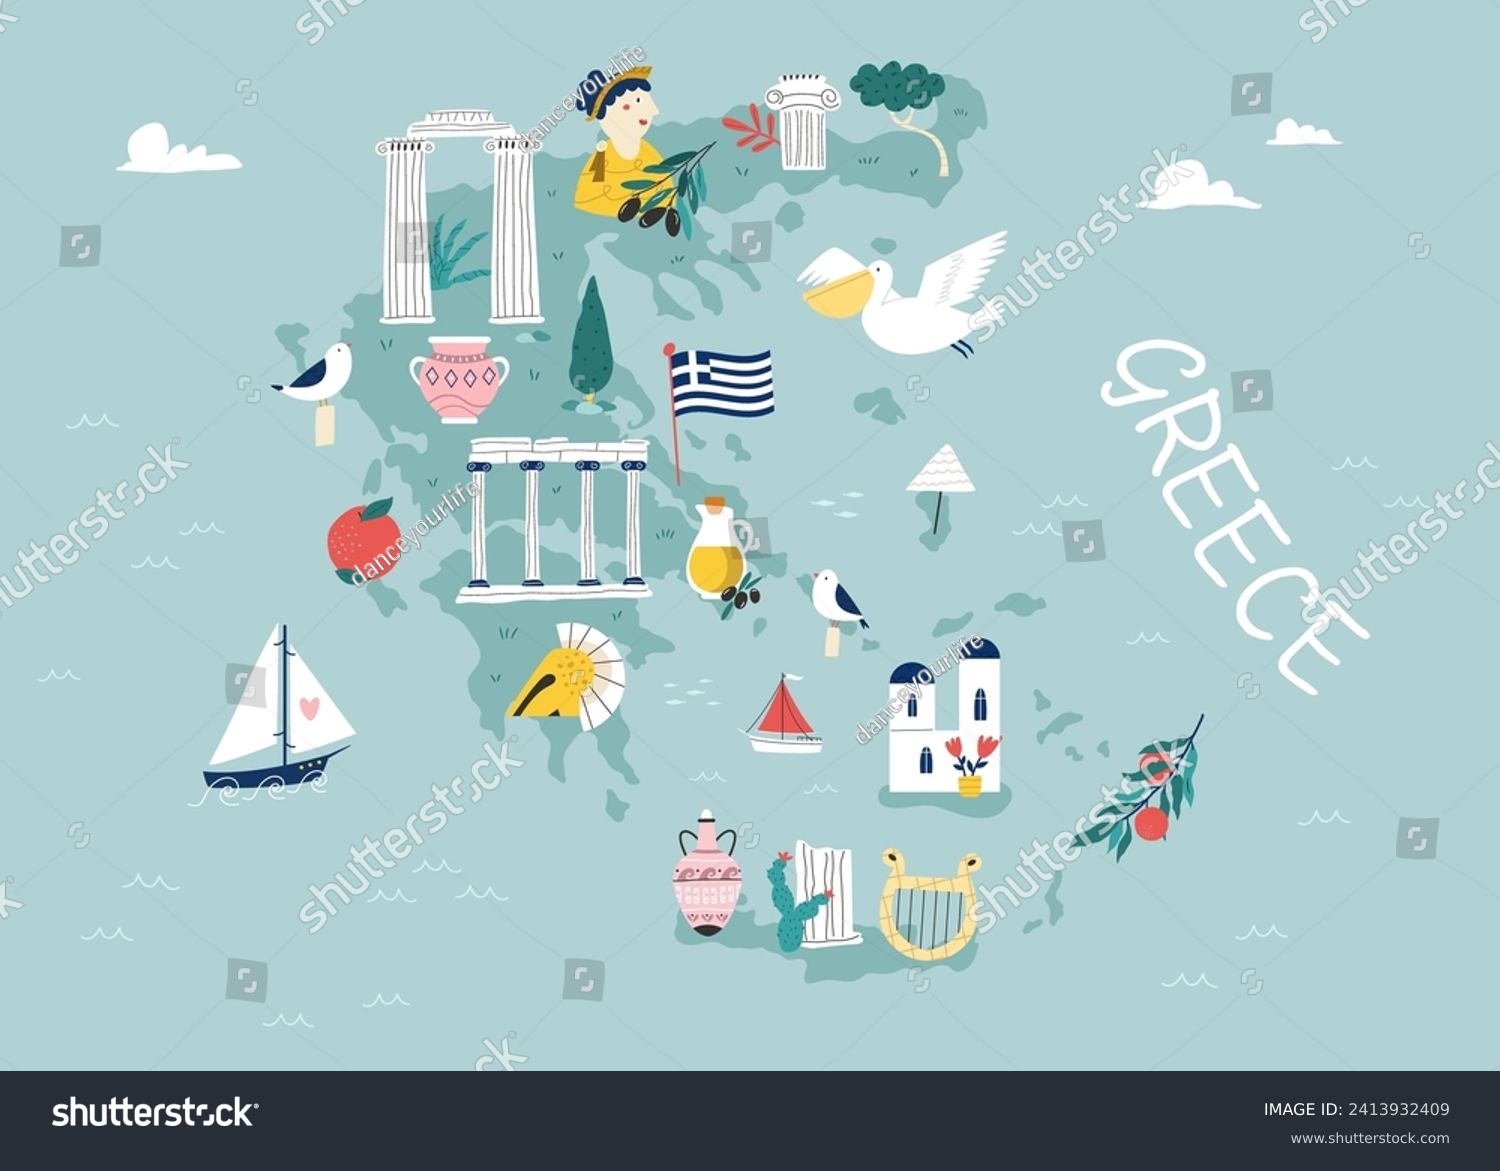 SVG of Vector stylized illustrated map of Greece with famous landmarks, places and symbols. Good for posters, frame art, travel leaflets, magazines, souvenirs svg